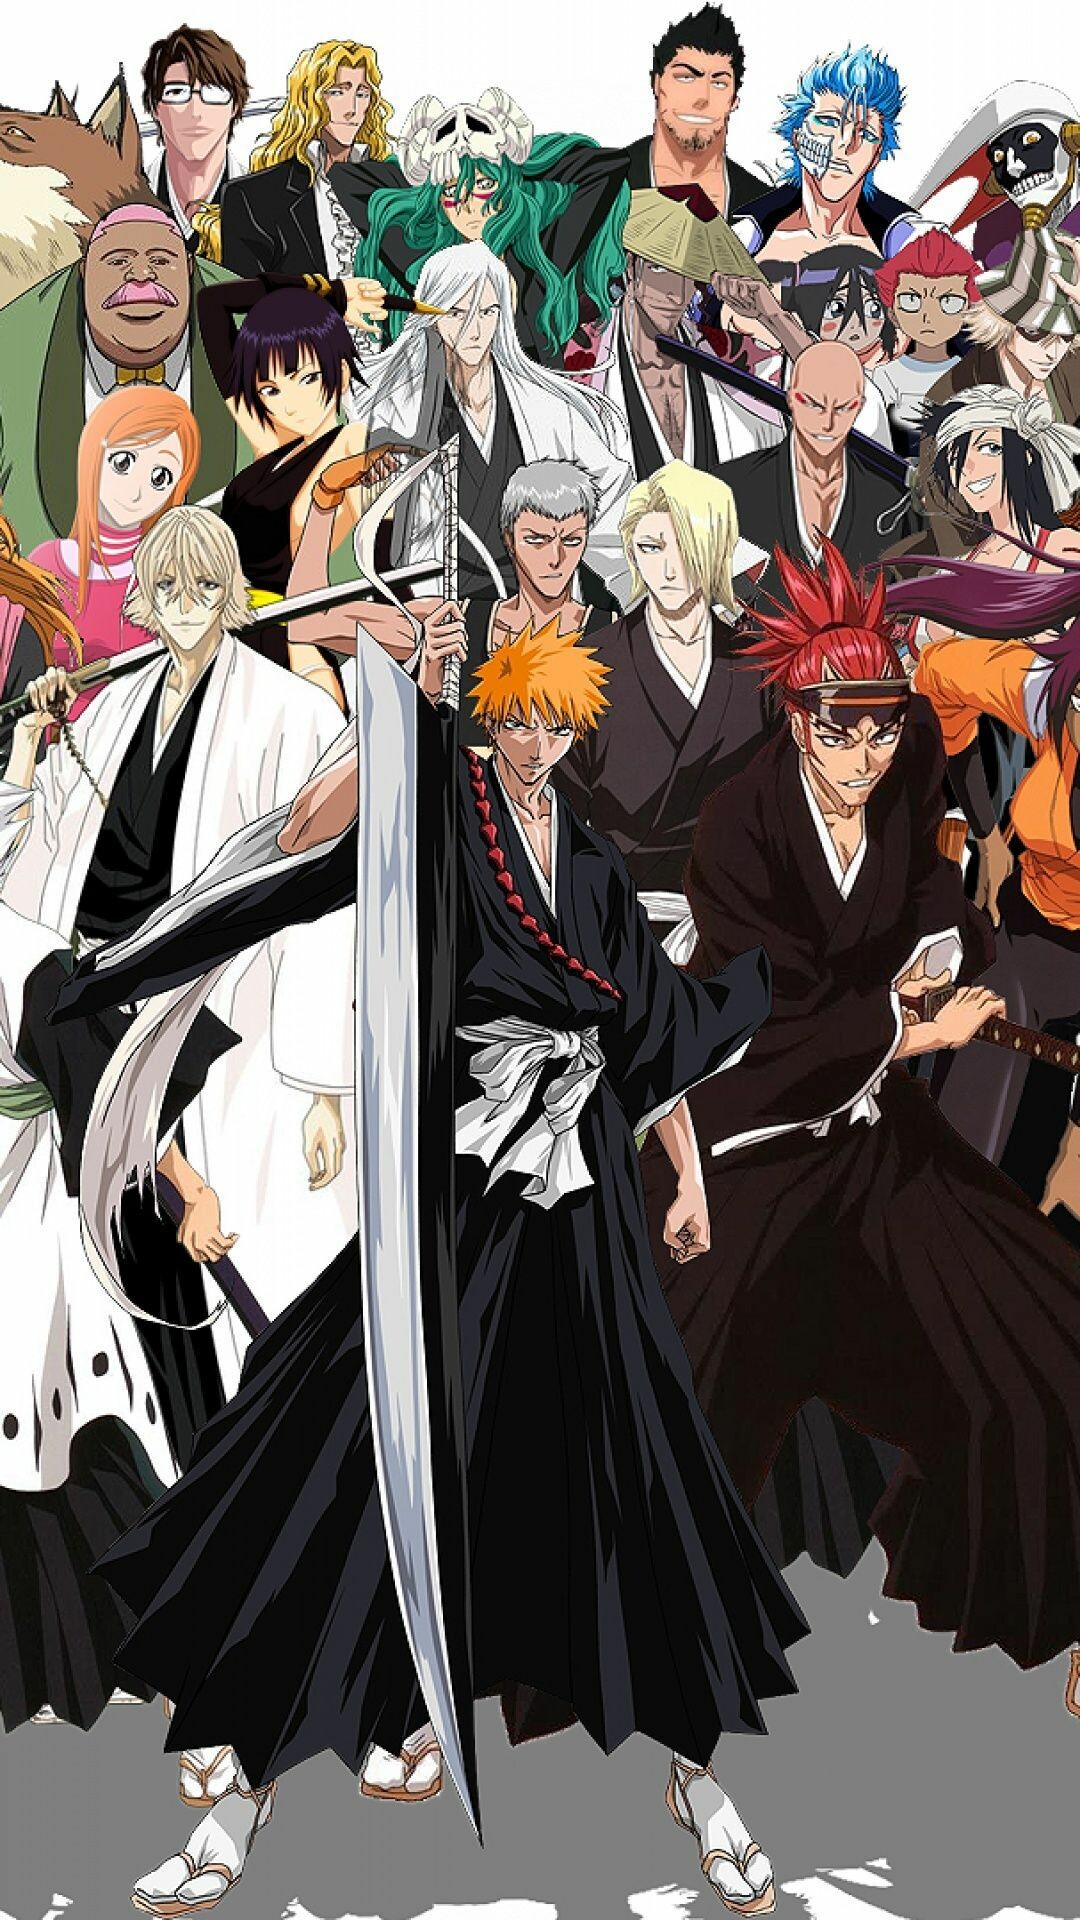 Bleach: Thousand Year Blood War: A manga written by Tite Kubo and published in Weekly Shounen Jump in 2001. 1080x1920 Full HD Background.